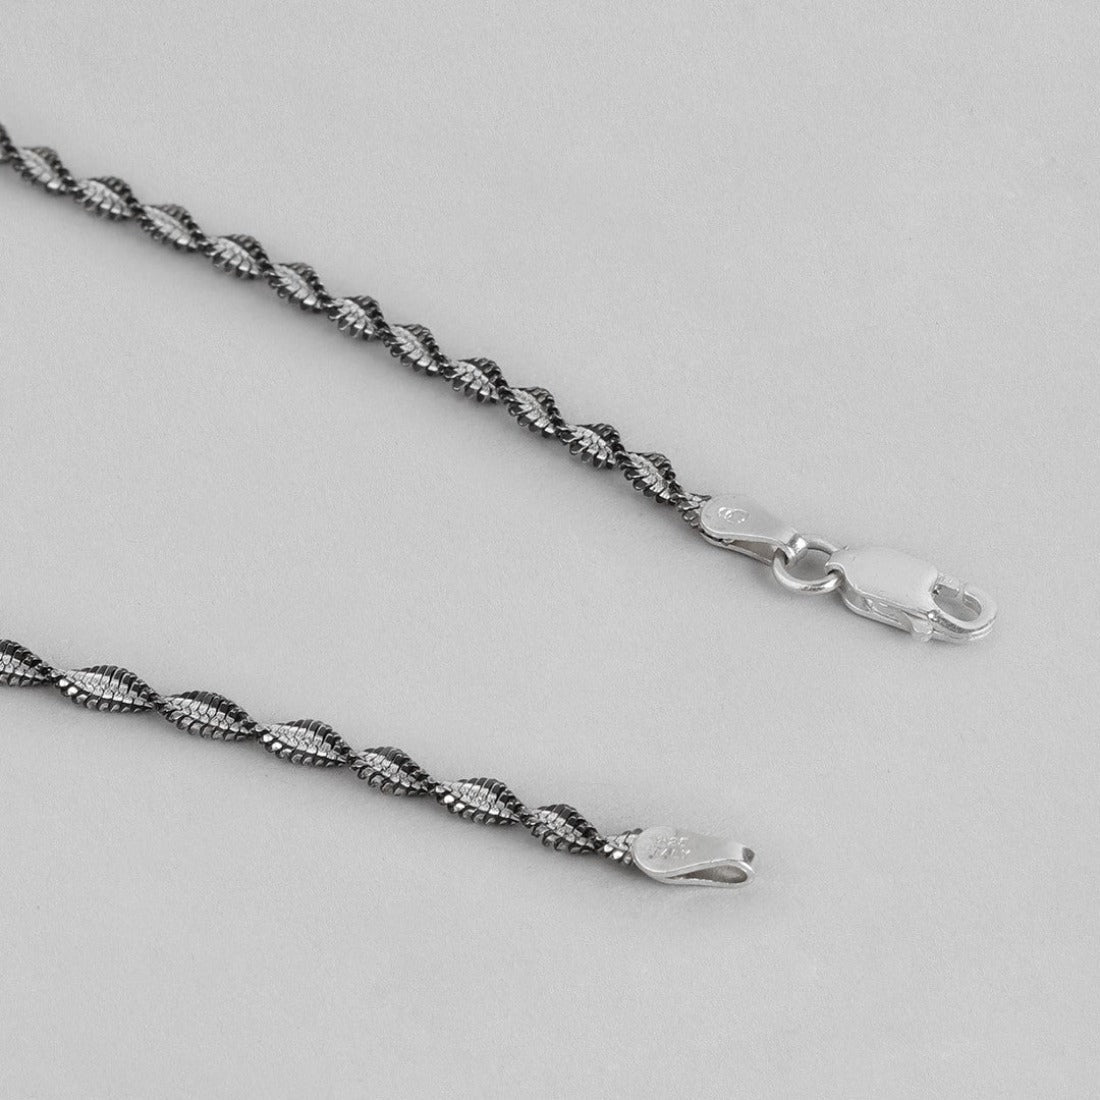 Entangled in Love 925 Sterling Silver Anklet - Valentines Edition With Gift Box